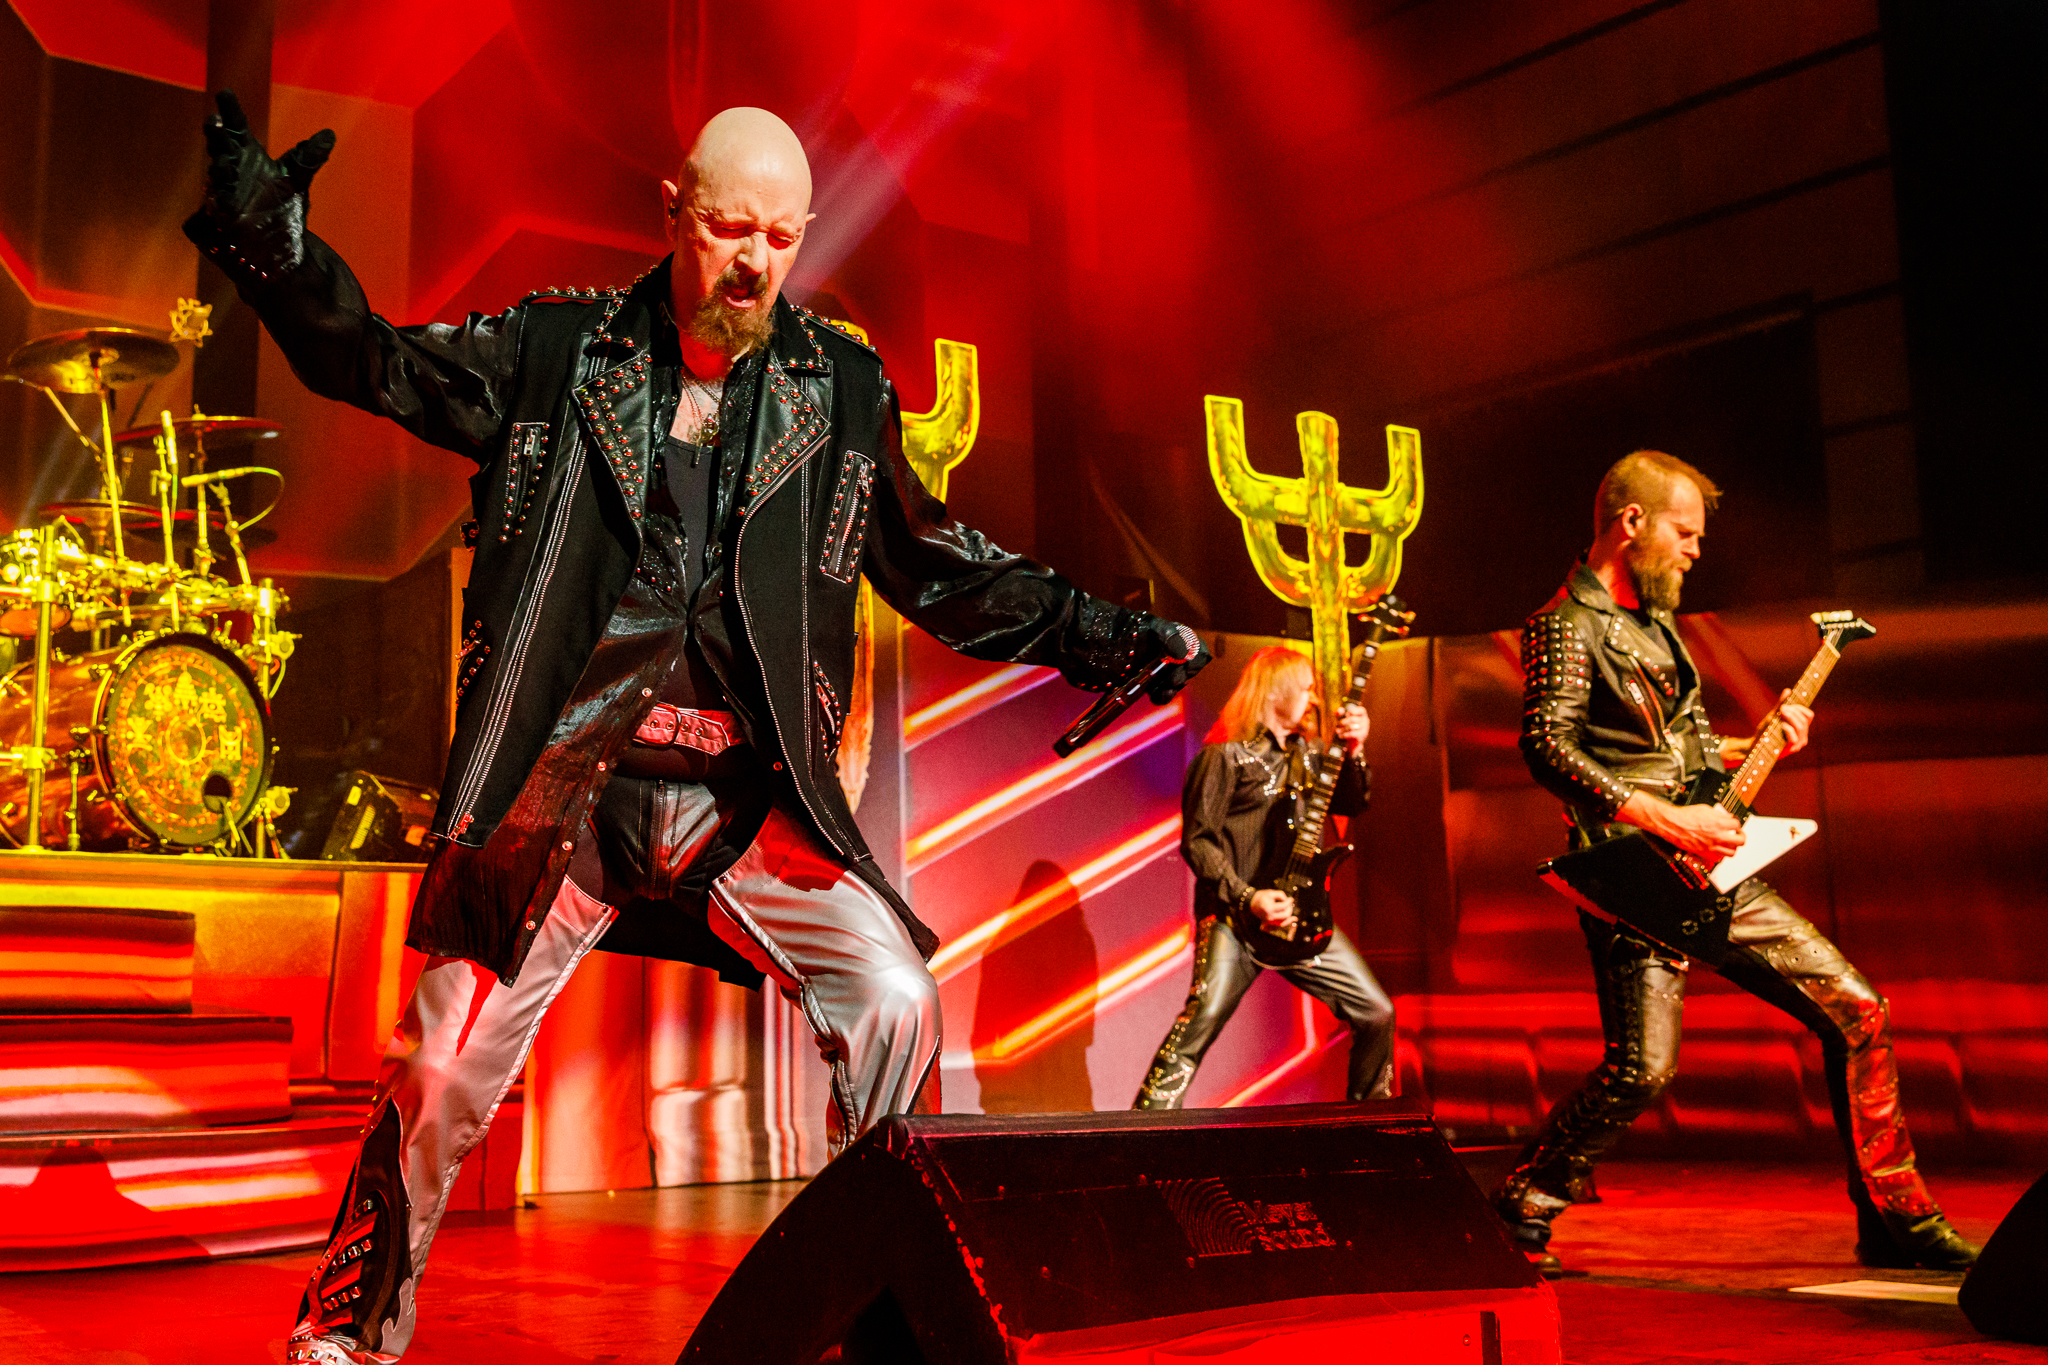 Judas Priest performing at The Anthem in Washington, DC on March 18th, 2018...